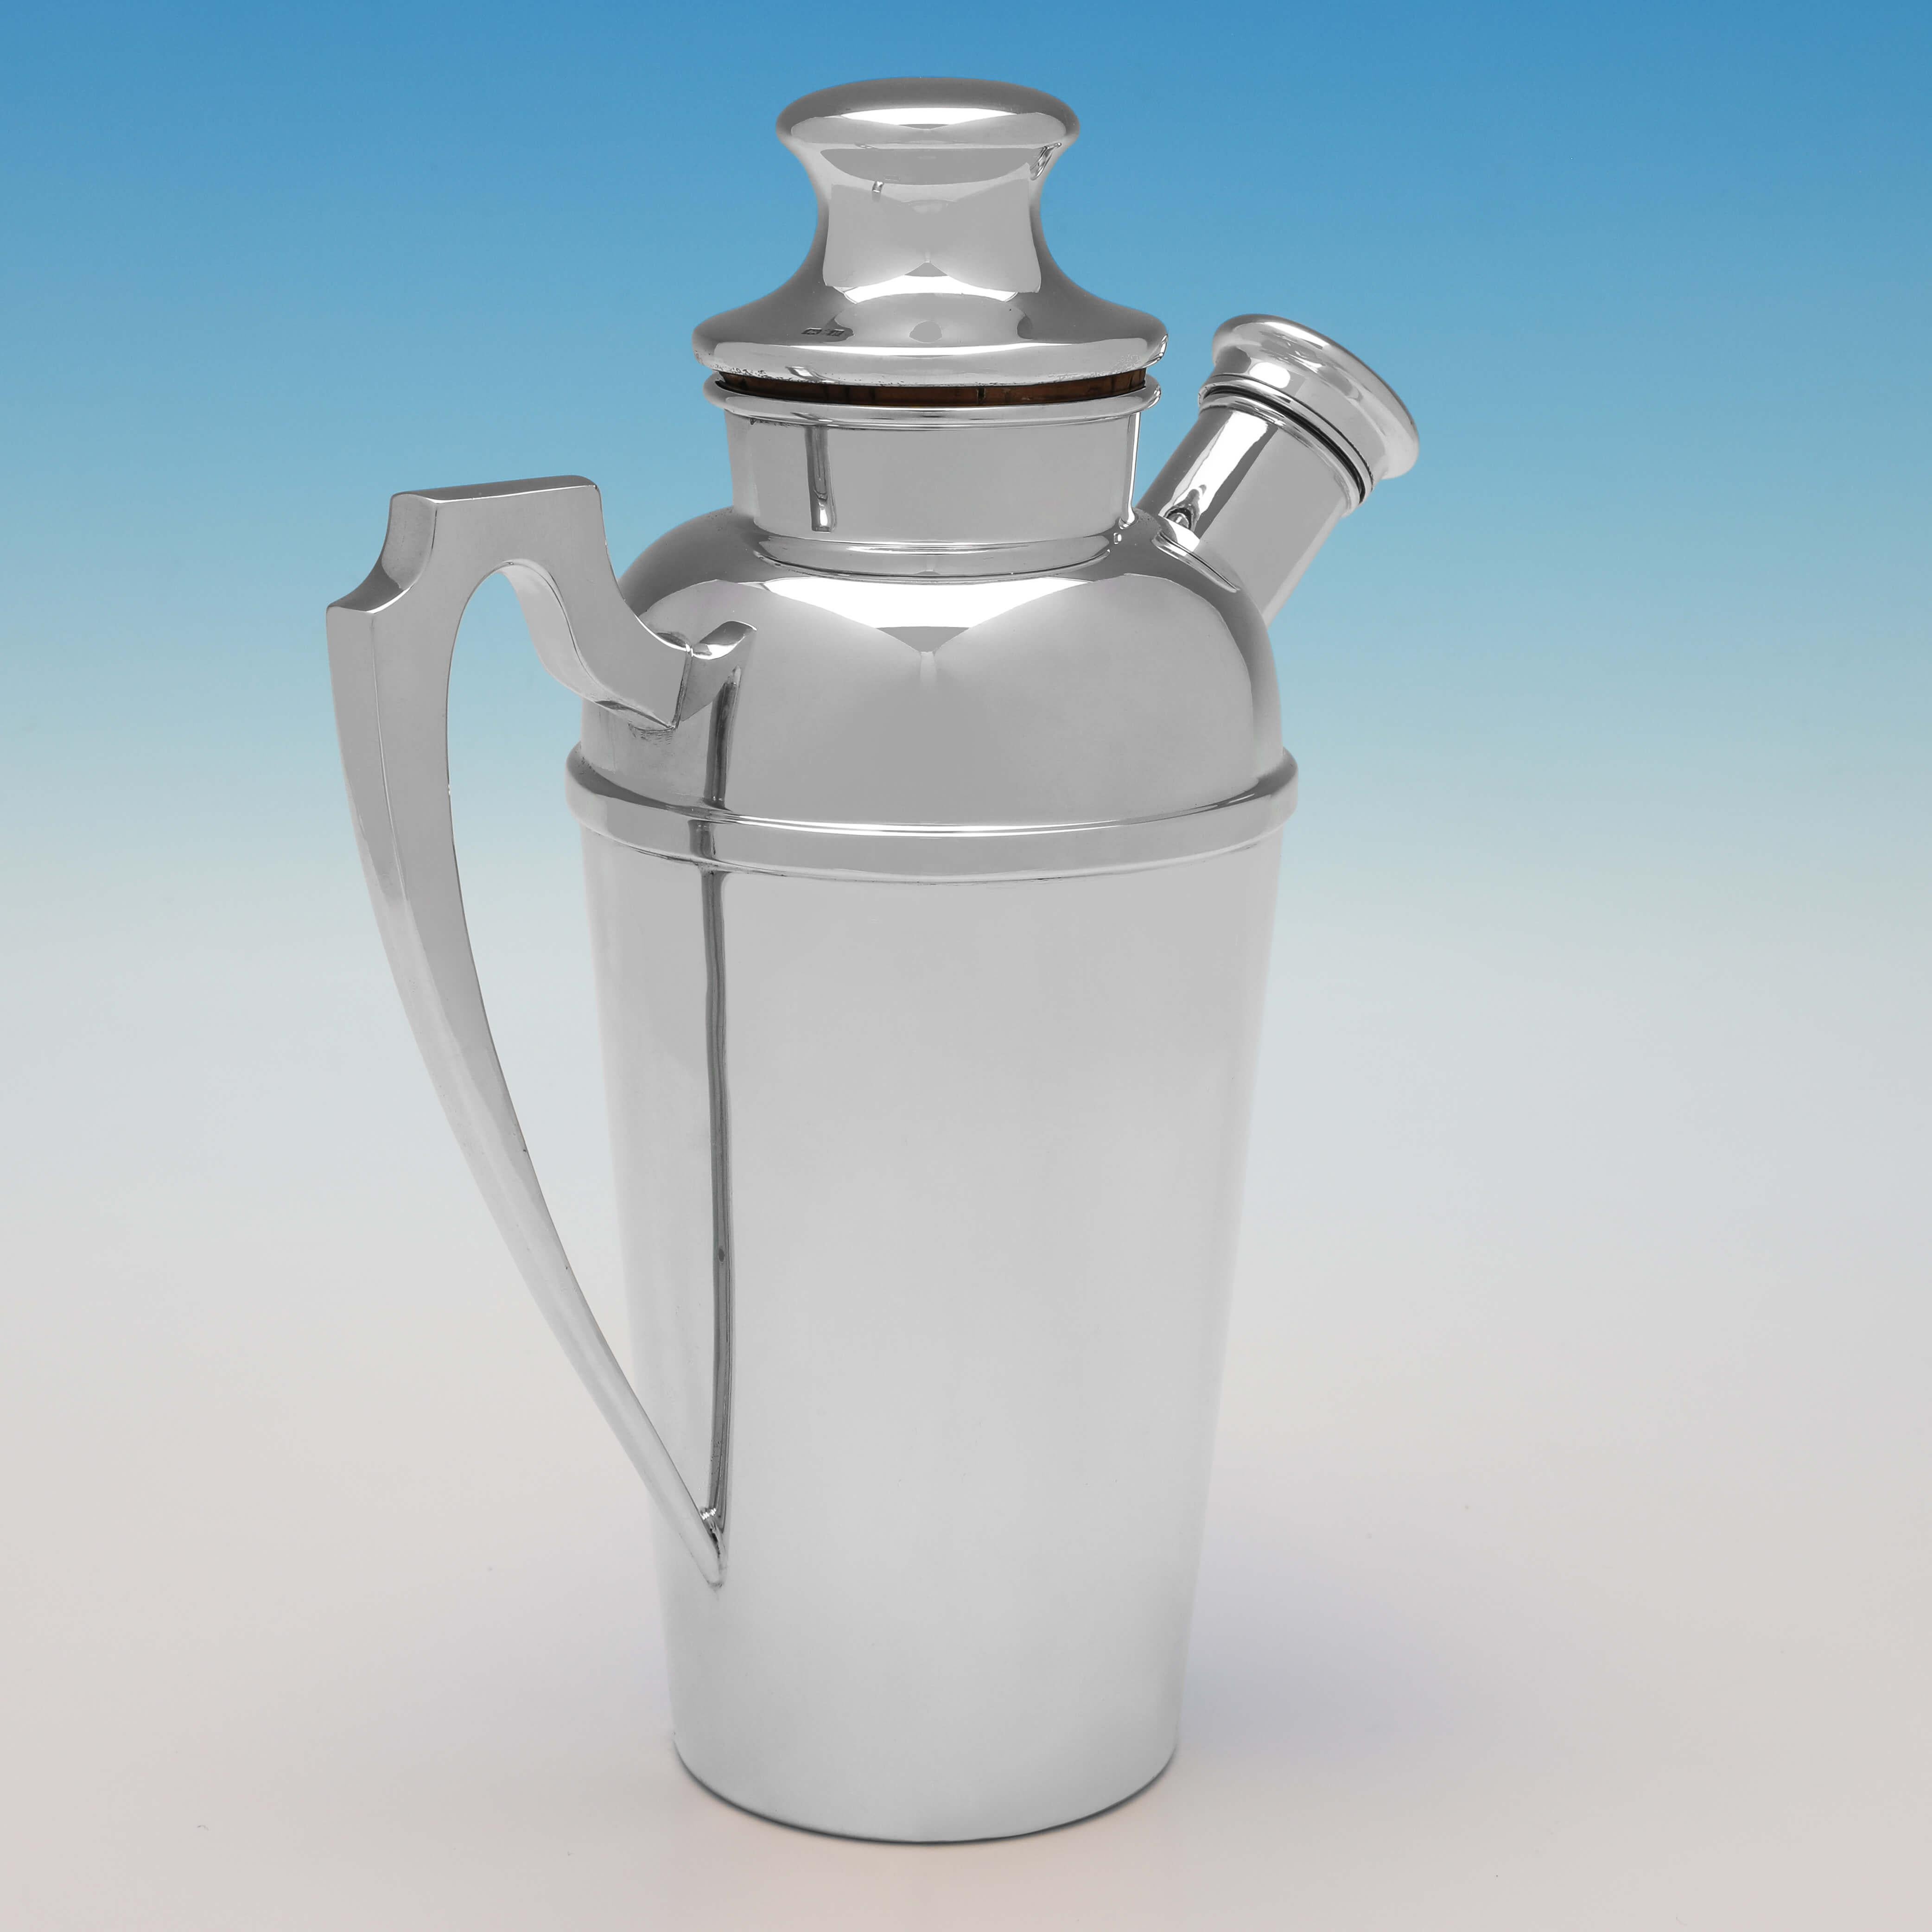 Art Deco Period English Sterling Silver Cocktail Shaker, Birmingham 1932 In Good Condition For Sale In London, London